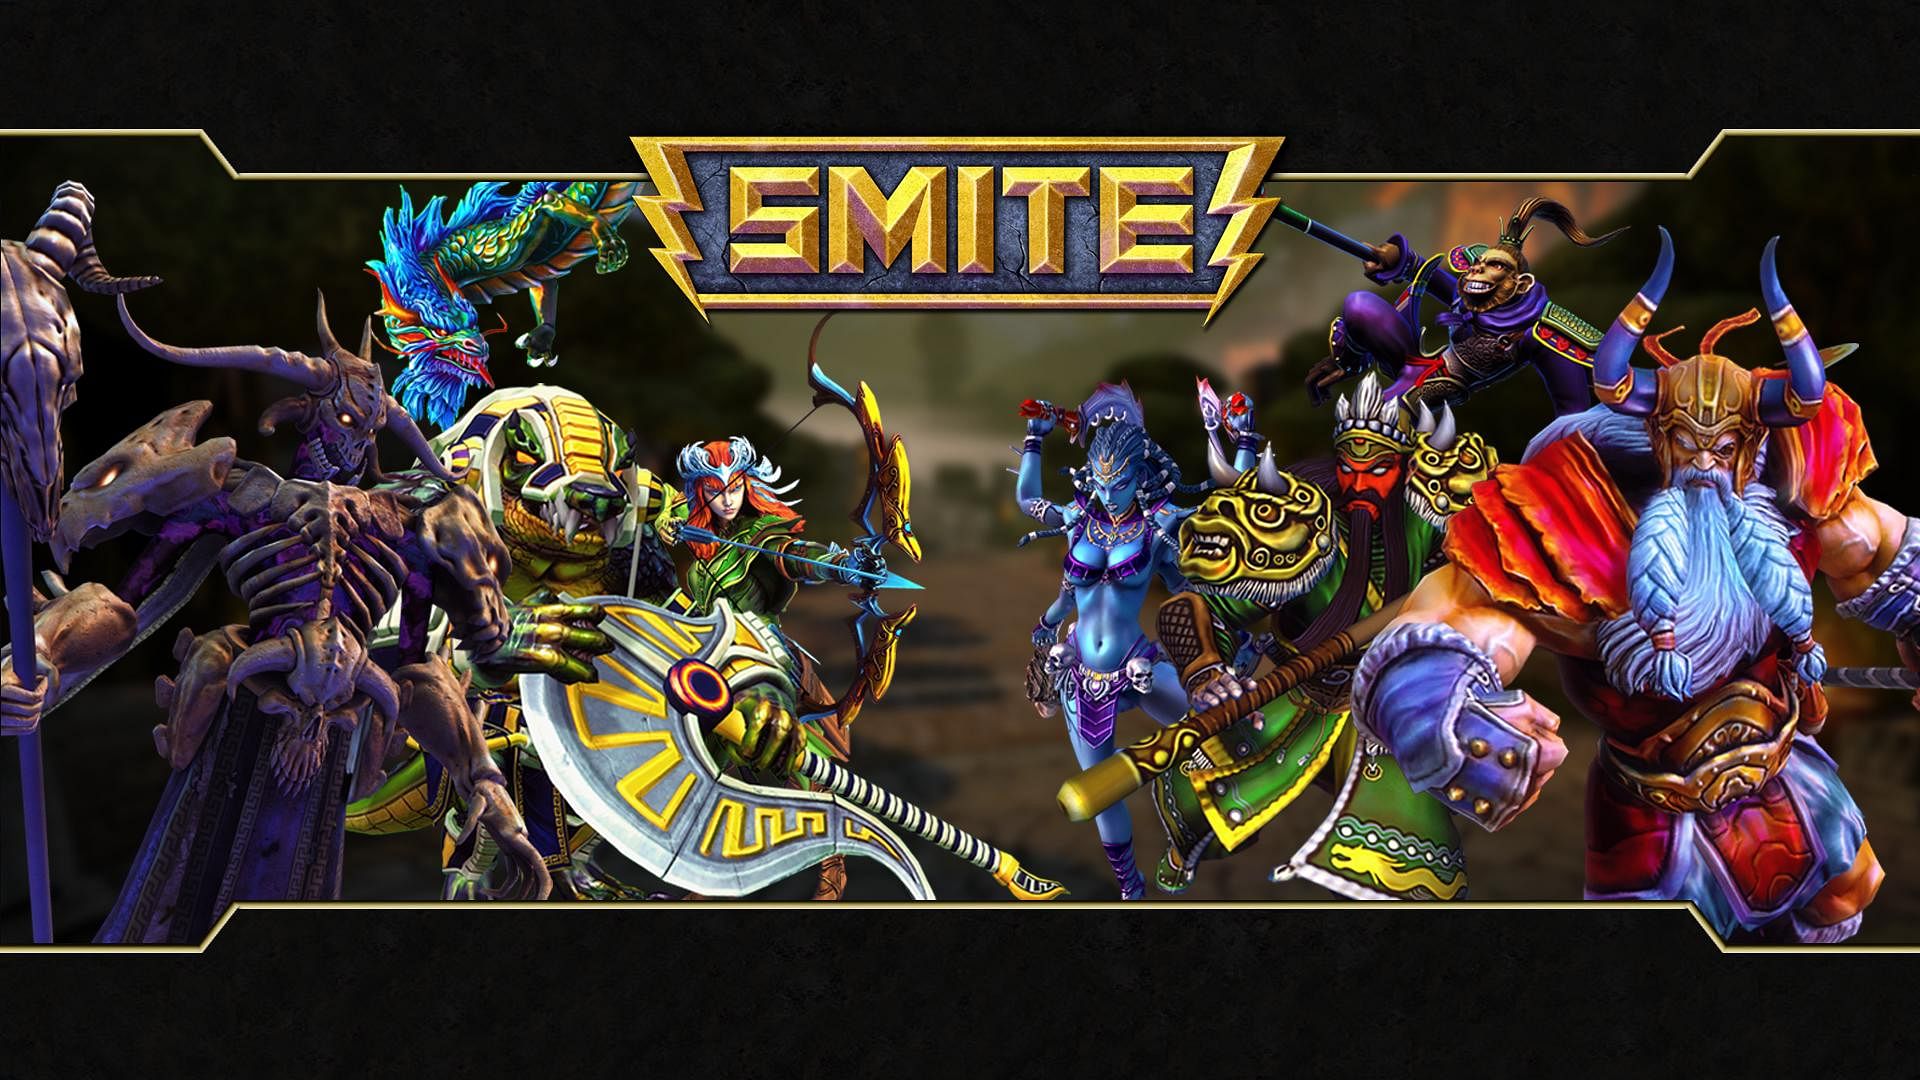 Hi-Rez to host a series of Smite Pro League Tournaments in Oceania